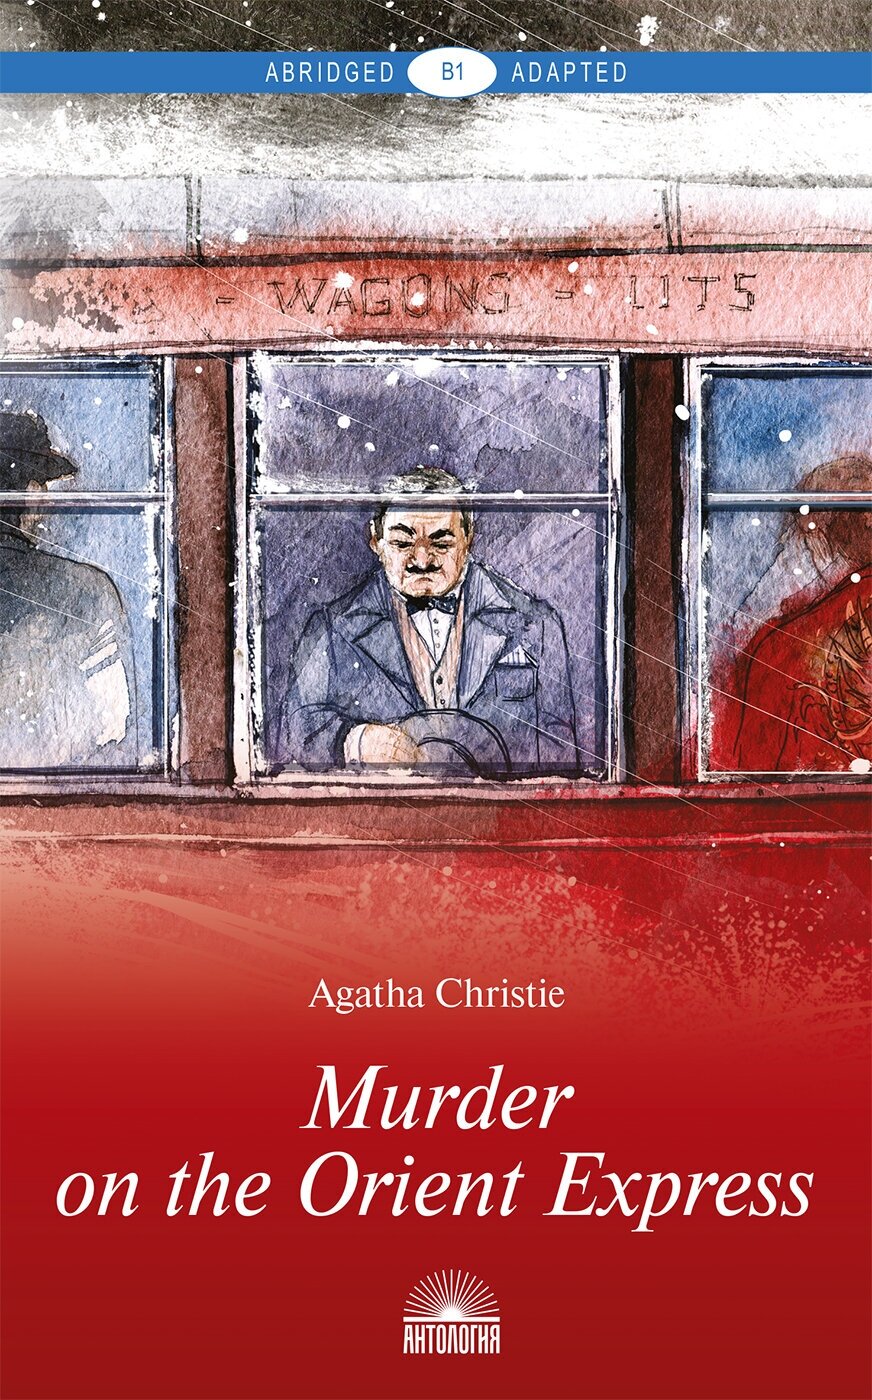 Кристи А. (Agatha Christie) "Murder on the Orient Express"